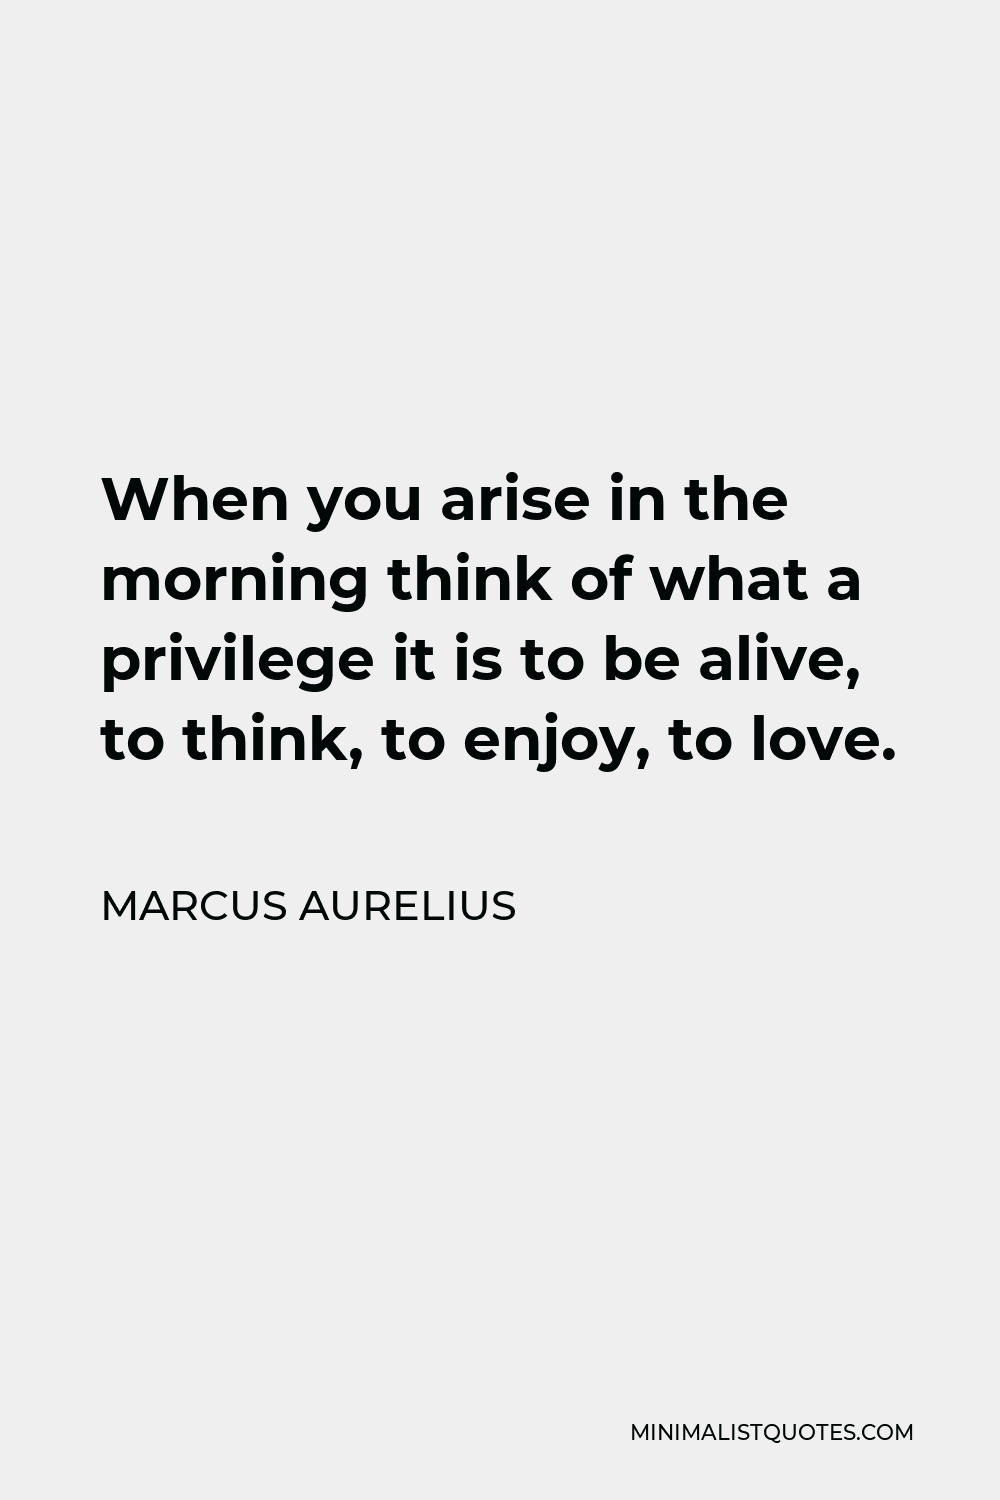 Marcus Aurelius Quote - When you arise in the morning think of what a privilege it is to be alive, to think, to enjoy, to love.